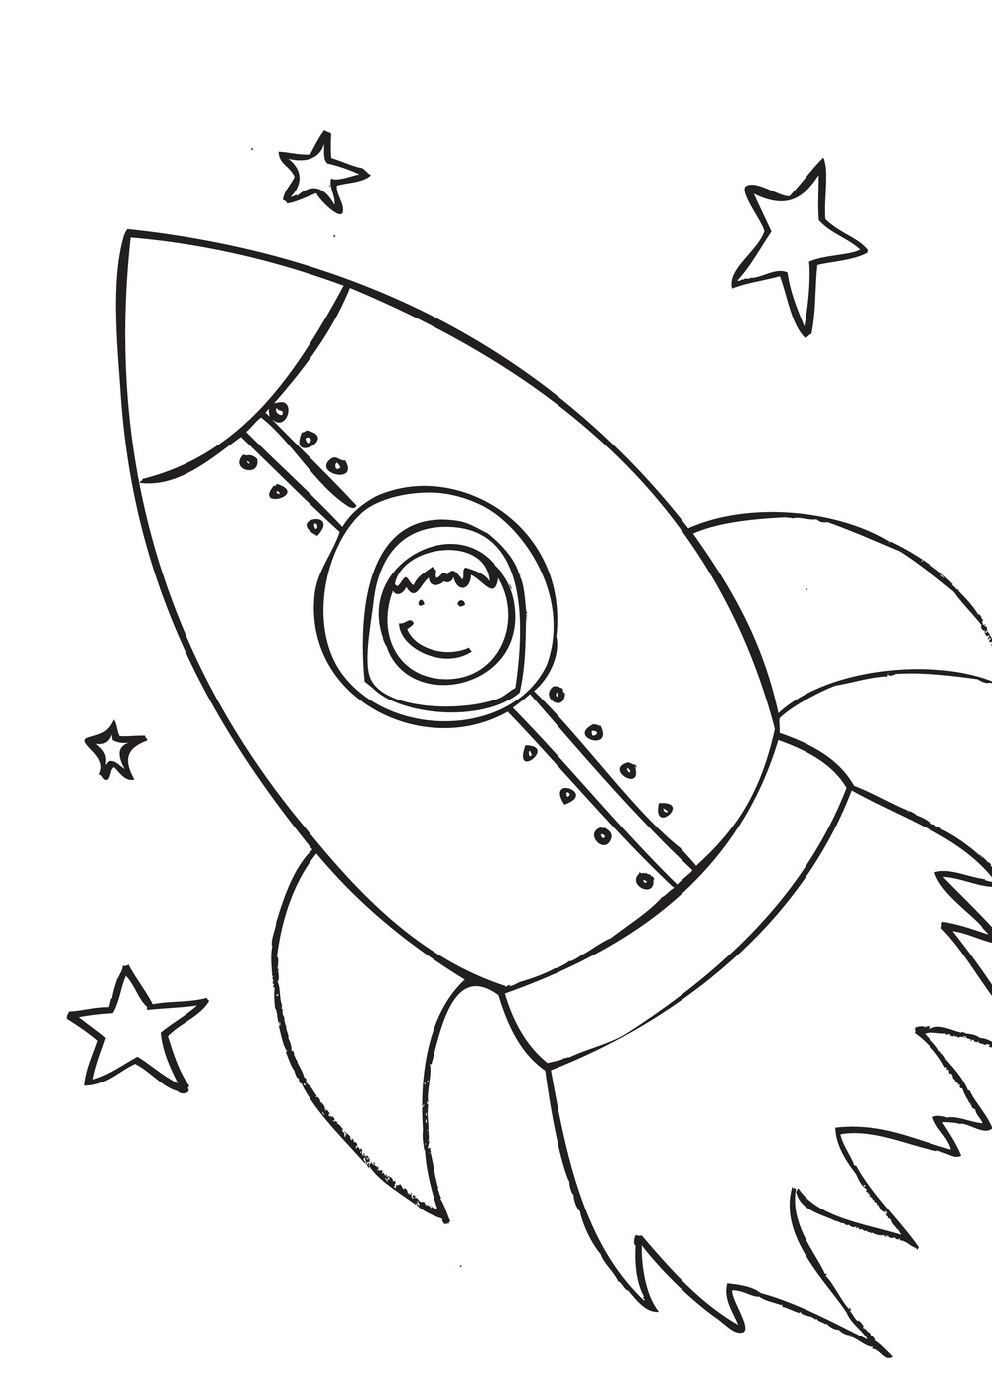 Toddler-Activity-Pages-Coloring